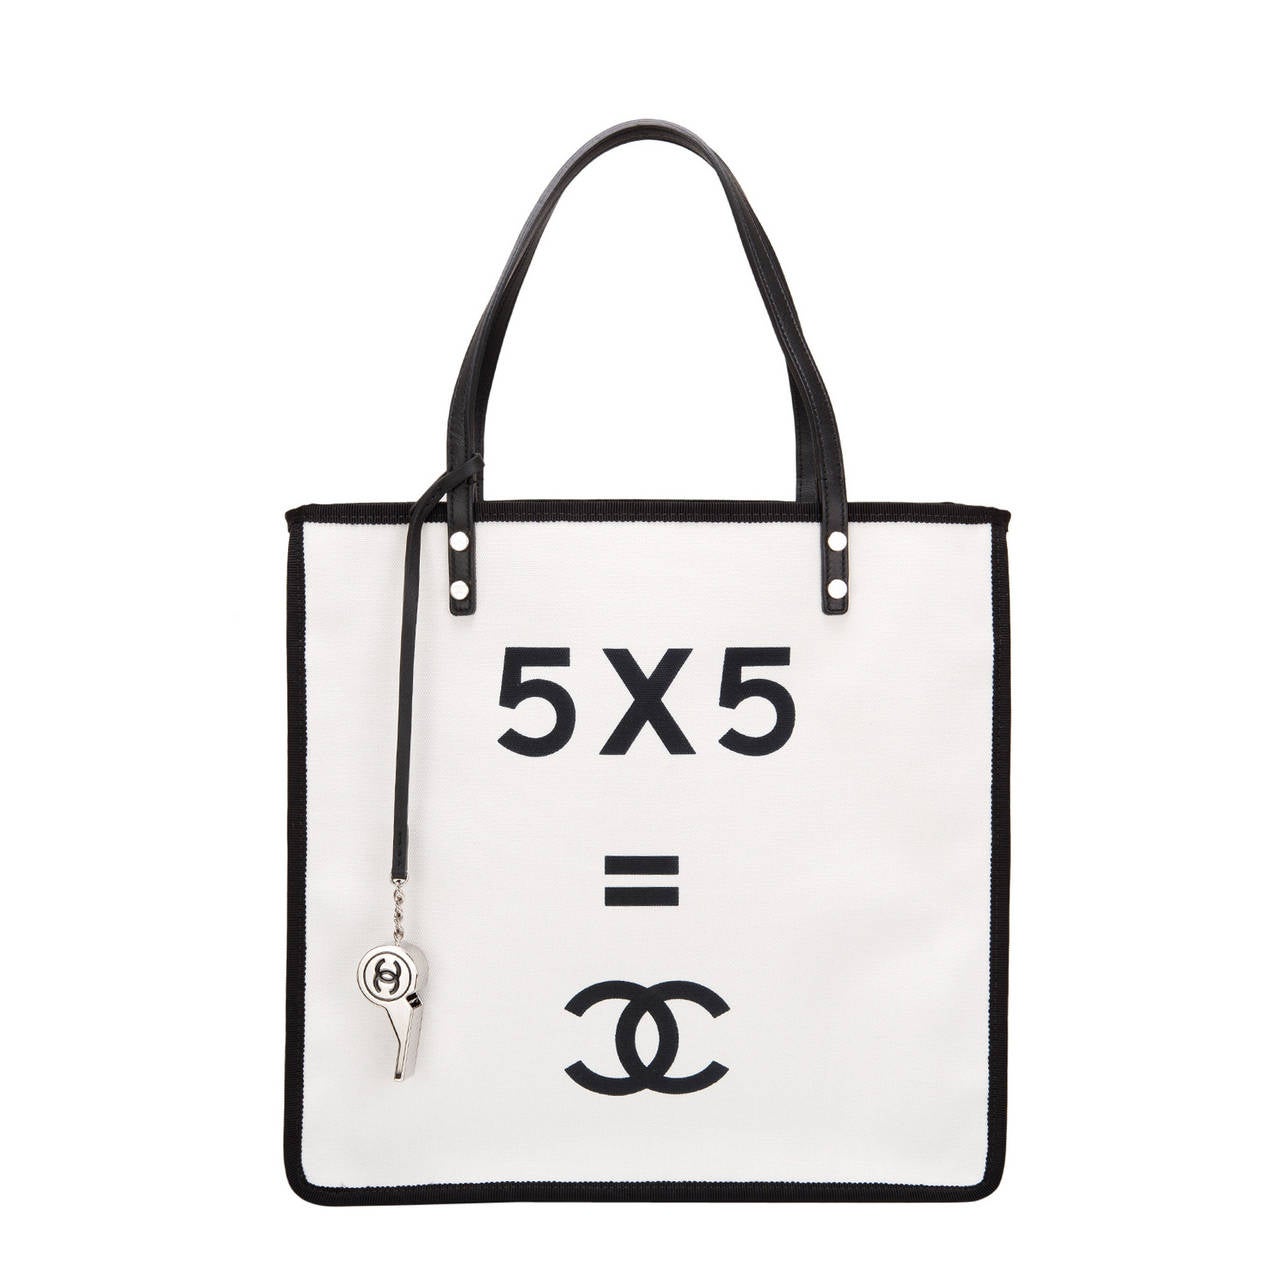 Chanel "5 x 5 = CC" Shopping Tote For Sale